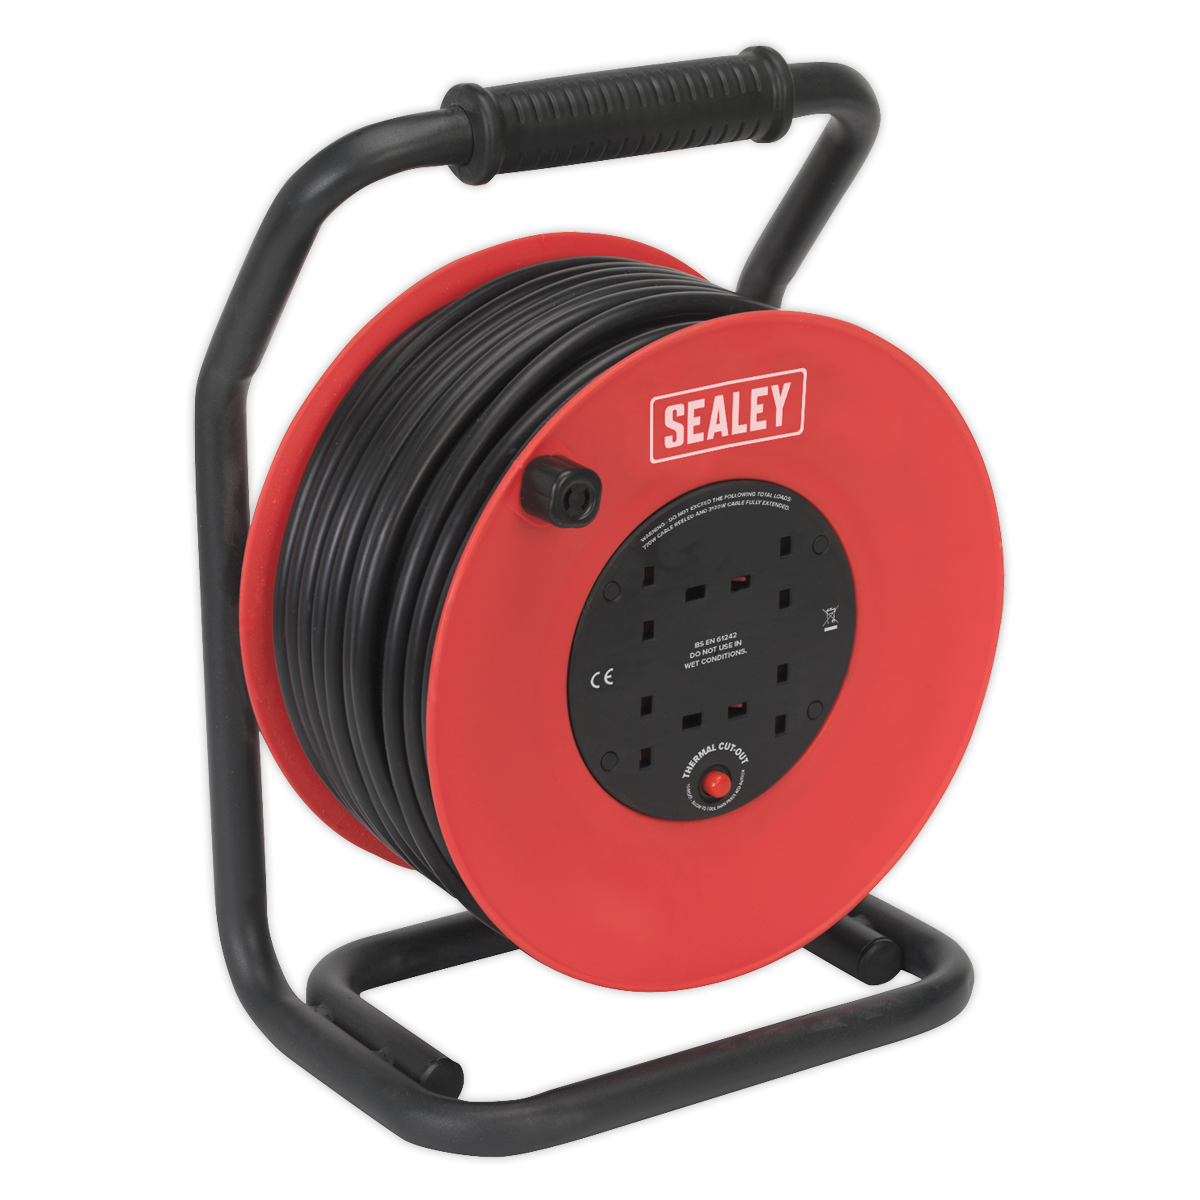 Sealey Cable Reel 50m 4 x 230V 2.5mm² Heavy-Duty Thermal Trip